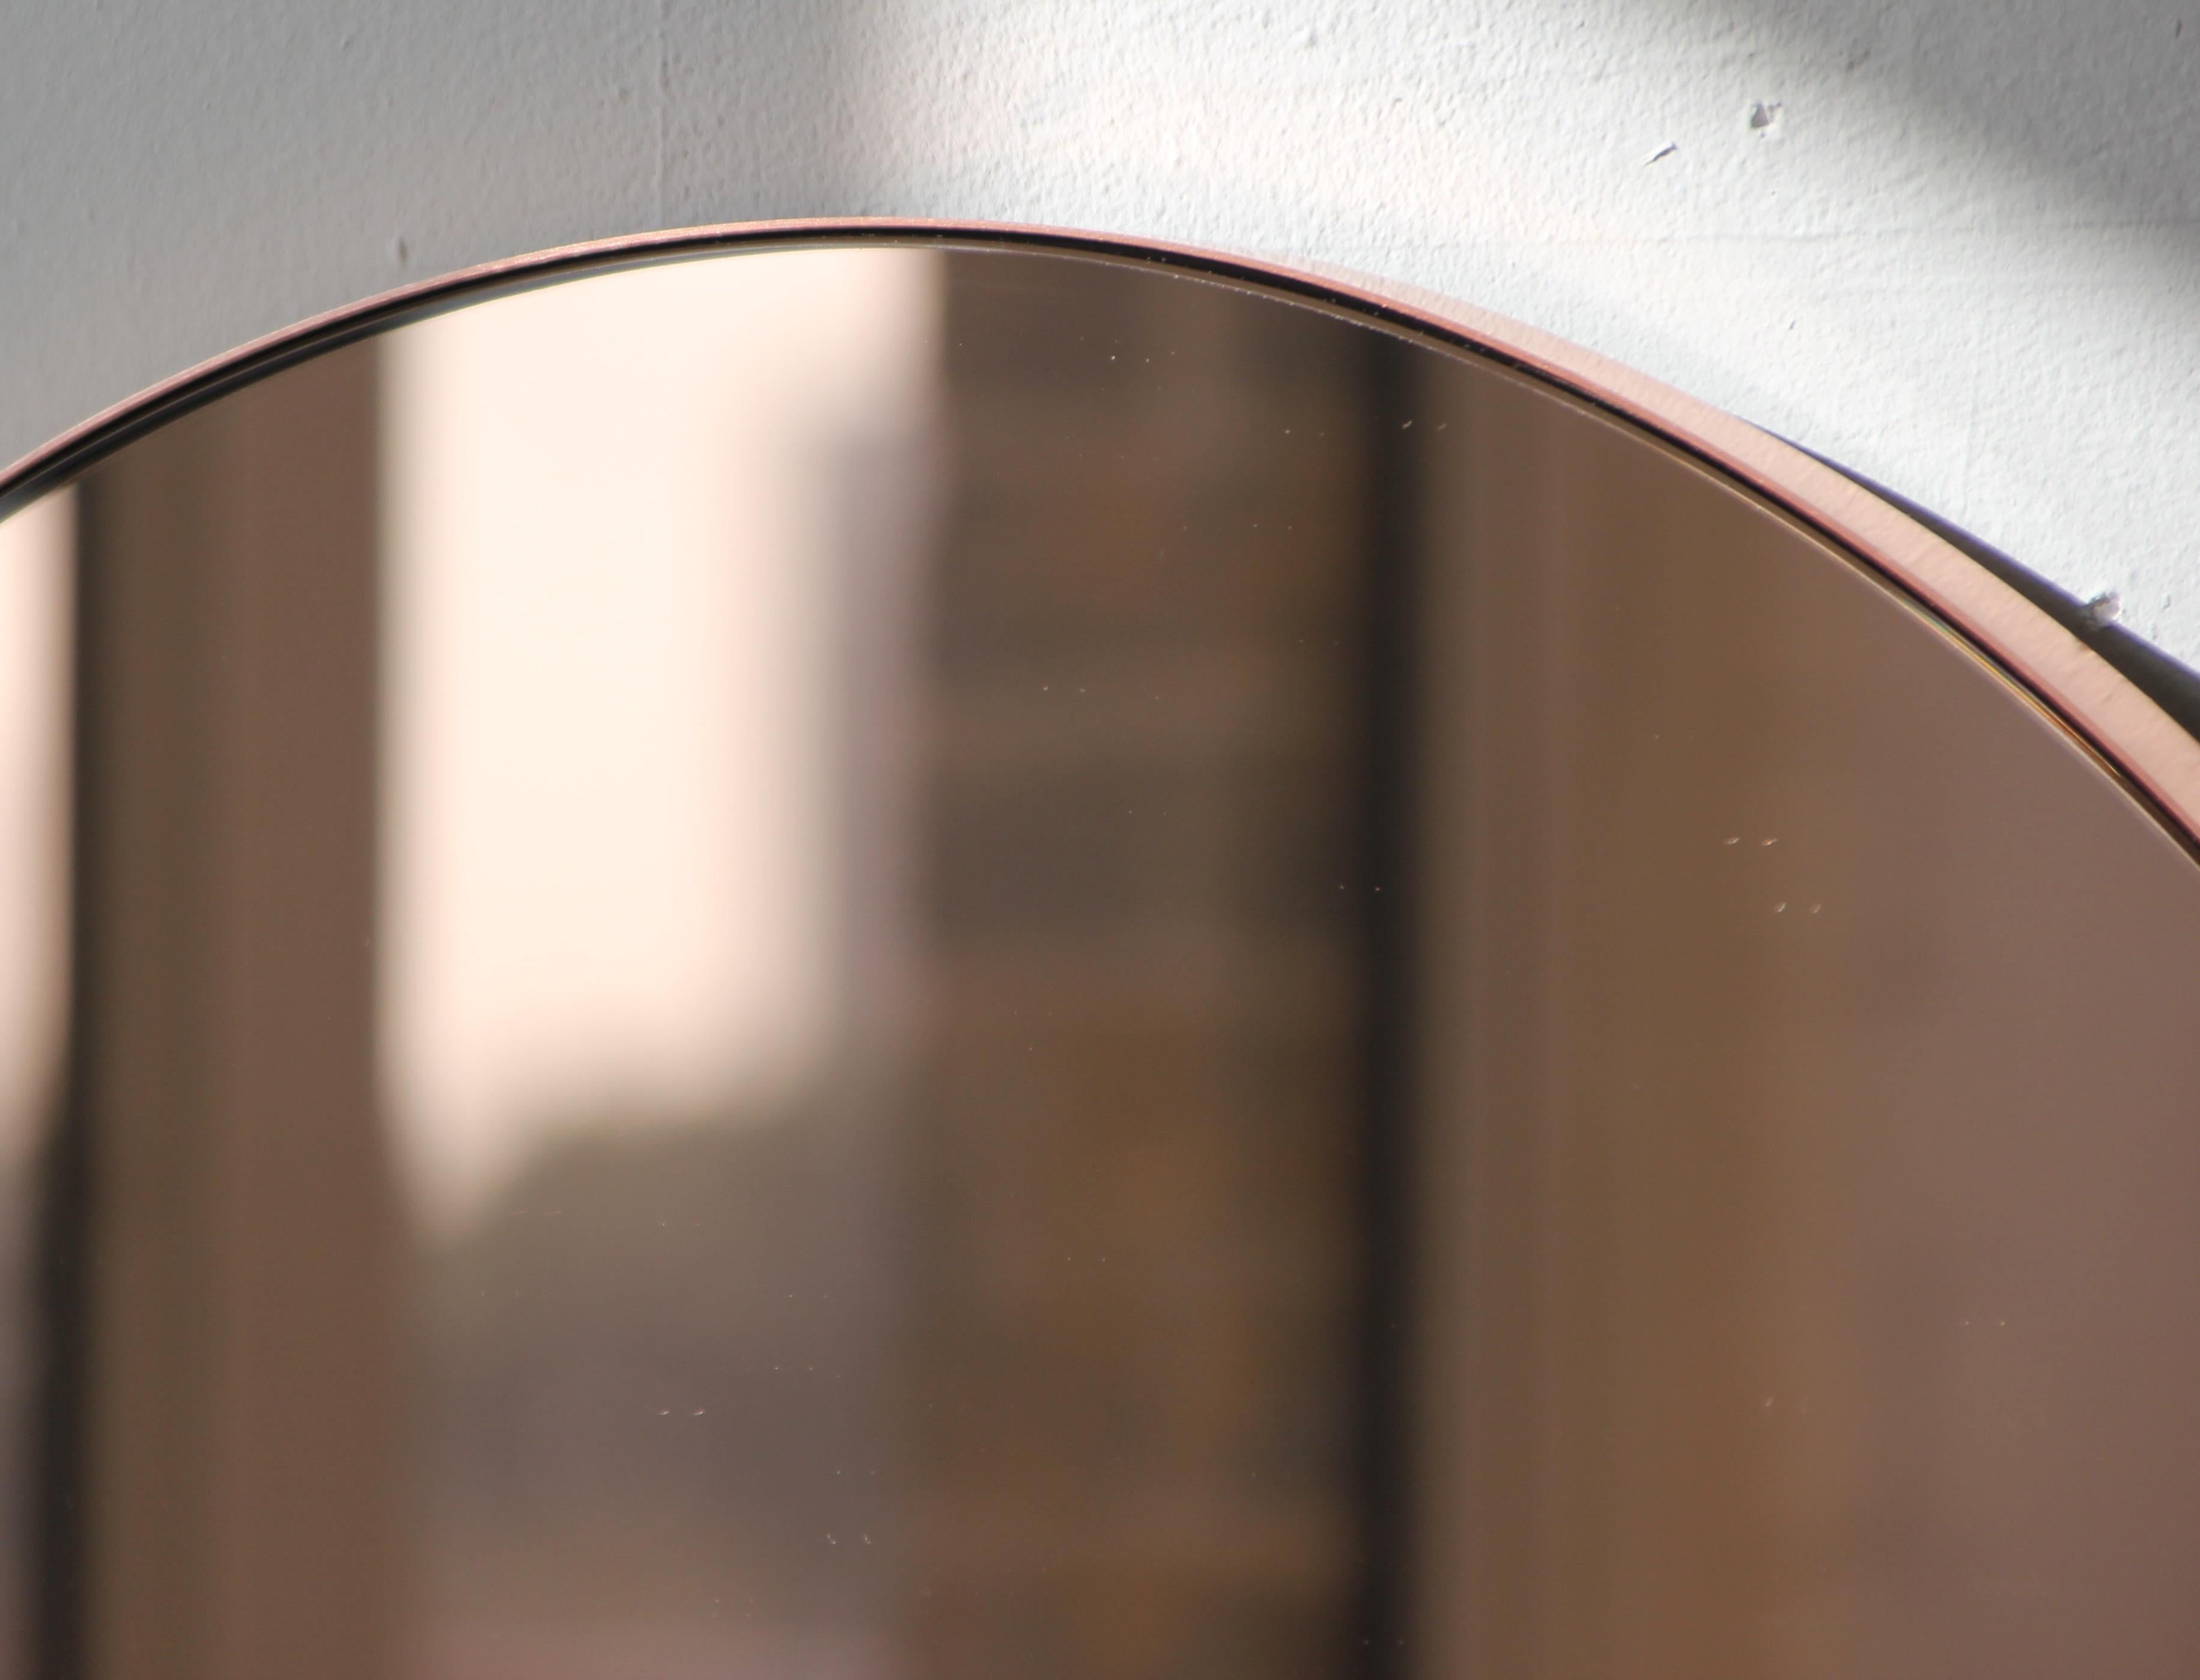 Orbis Rose Gold Tinted Round Minimalist Mirror with Copper Frame, Small In New Condition For Sale In London, GB